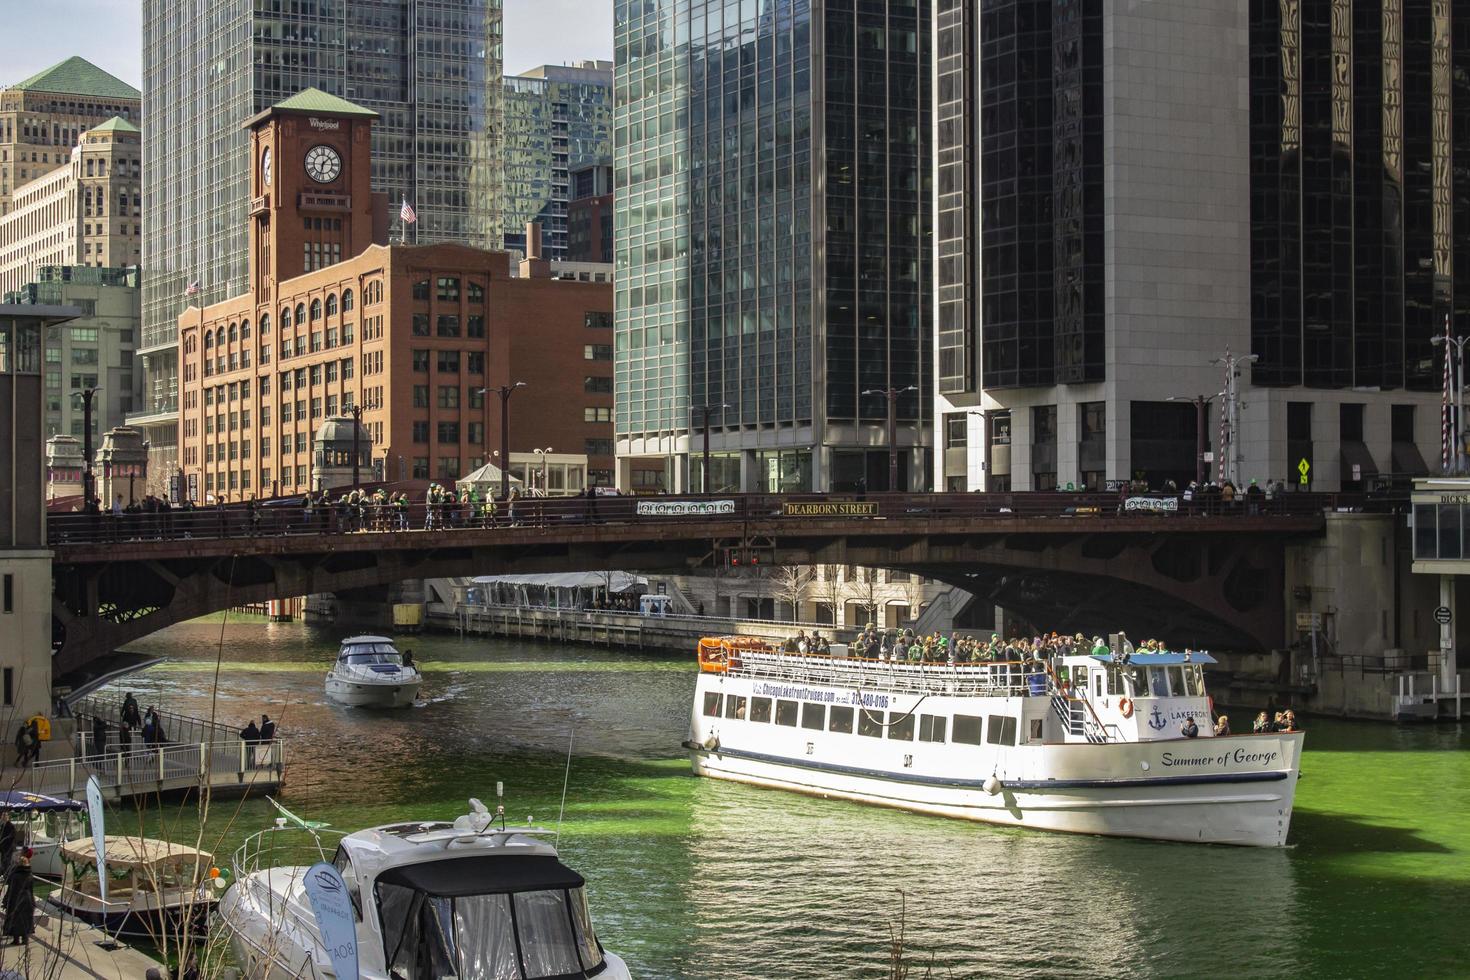 Chicago, Illinois, Mar 17, 2017 - Boats on the Chicago Riverwalk during St Patrick's Day photo